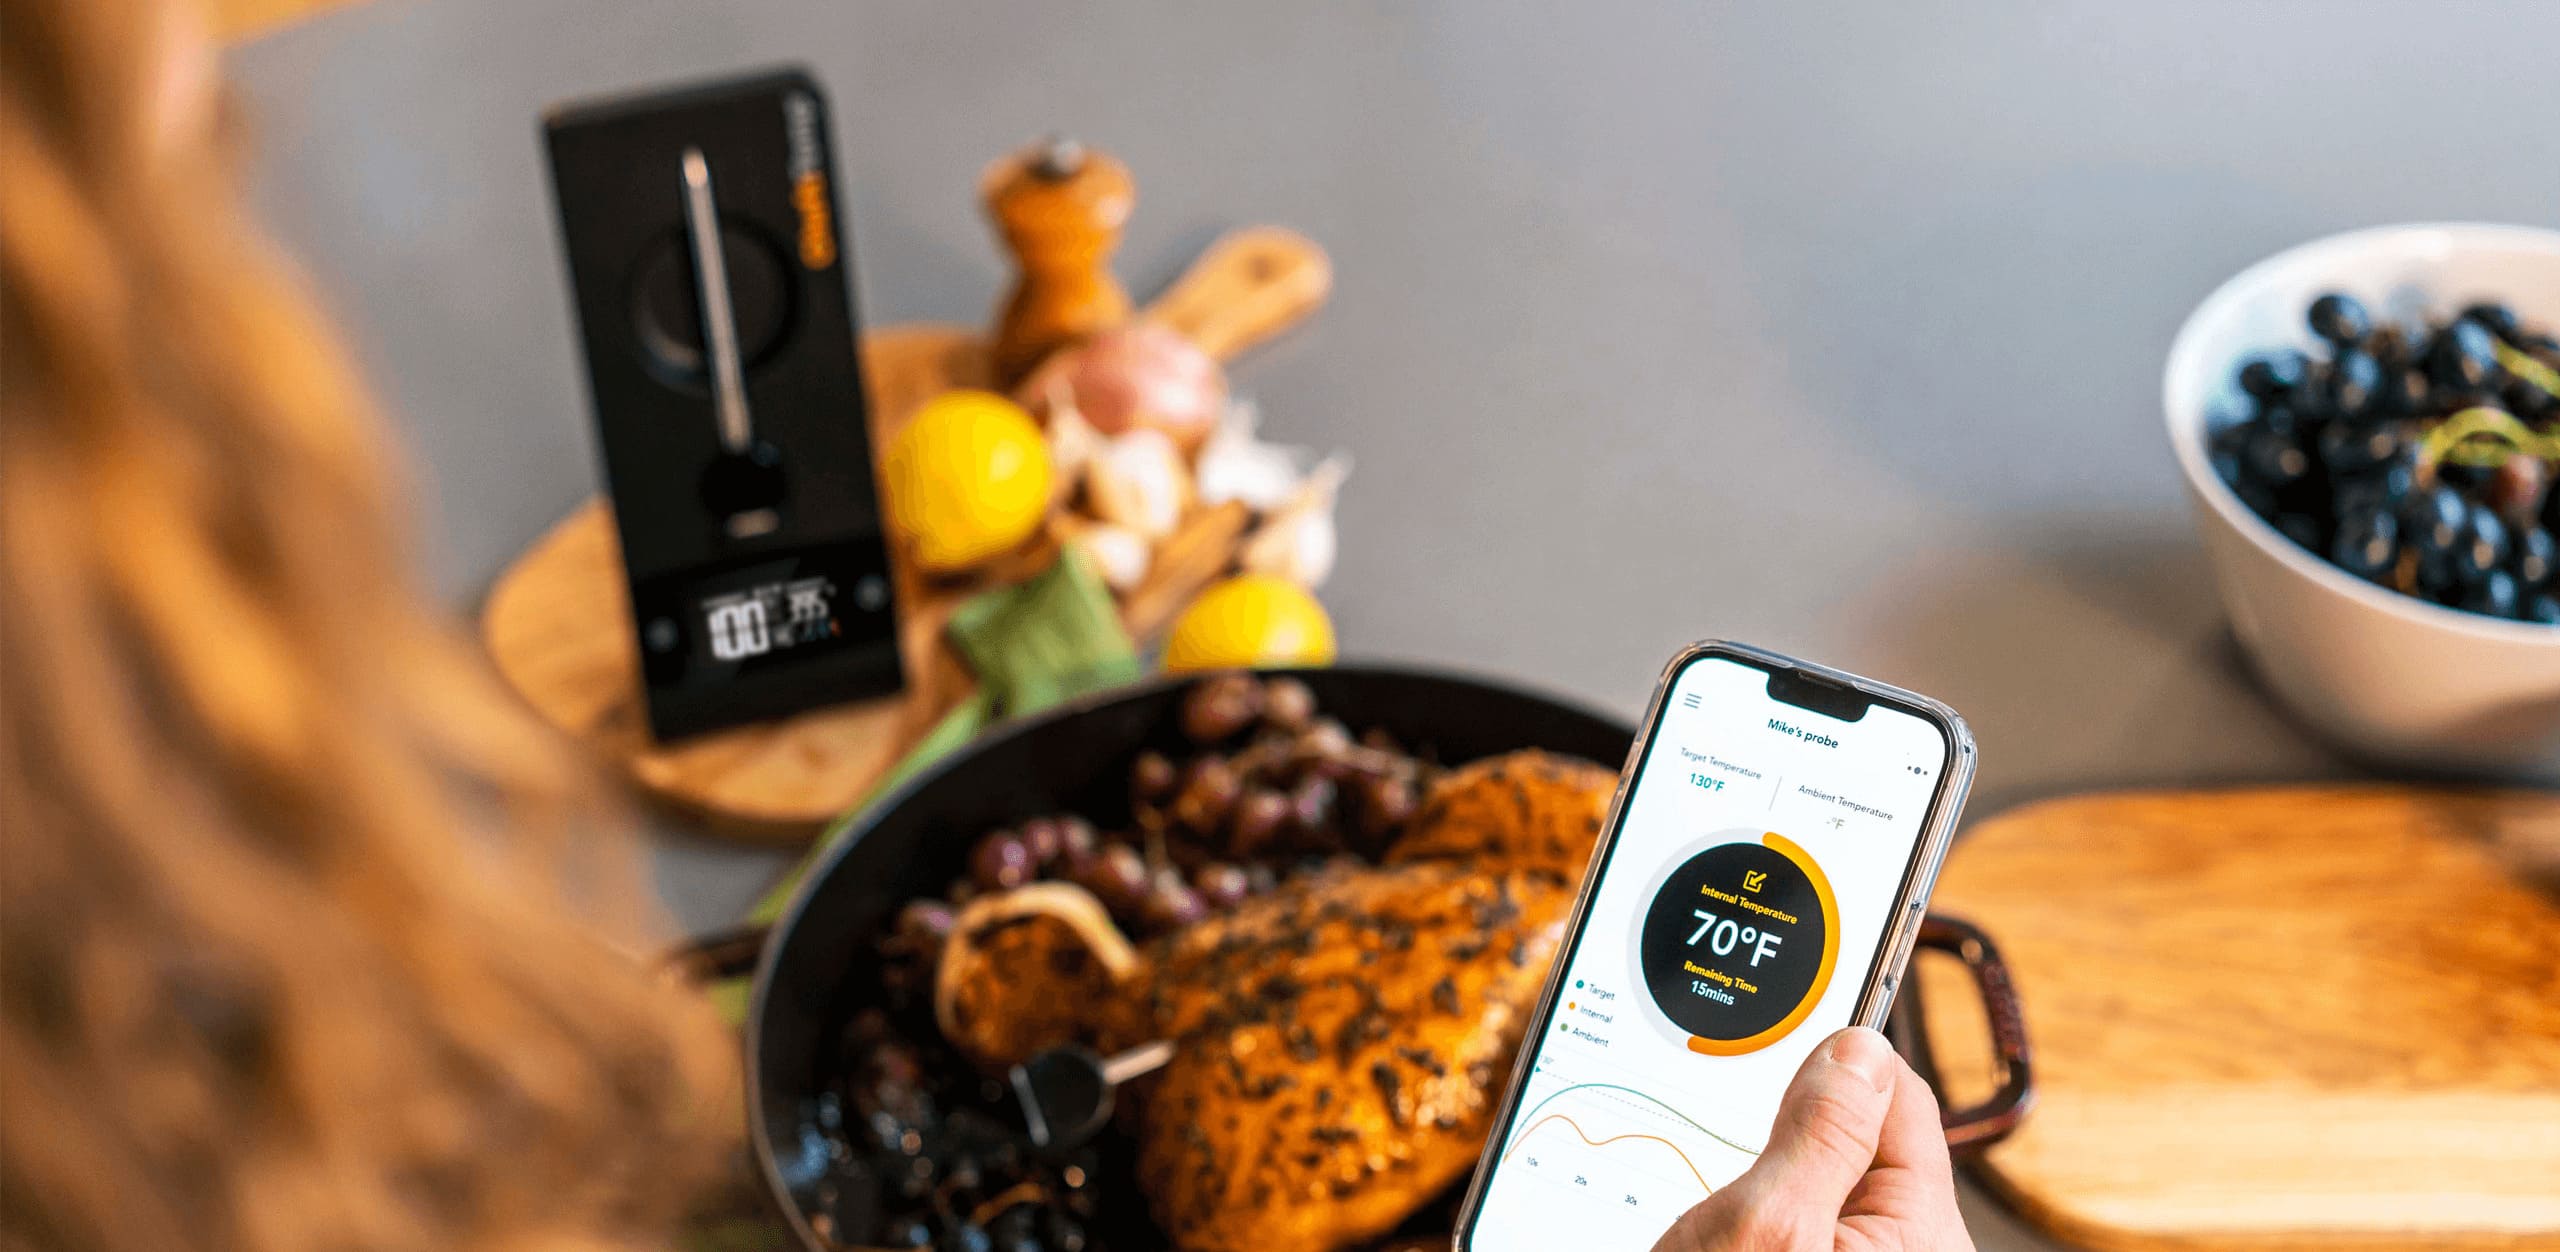 MEATER FURTHER ELEVATES THE KITCHEN EXPERIENCE WITH THE LAUNCH OF MEATER 2  PLUS - THE MOST INNOVATIVE SMART MEAT THERMOMETER ON THE MARKET